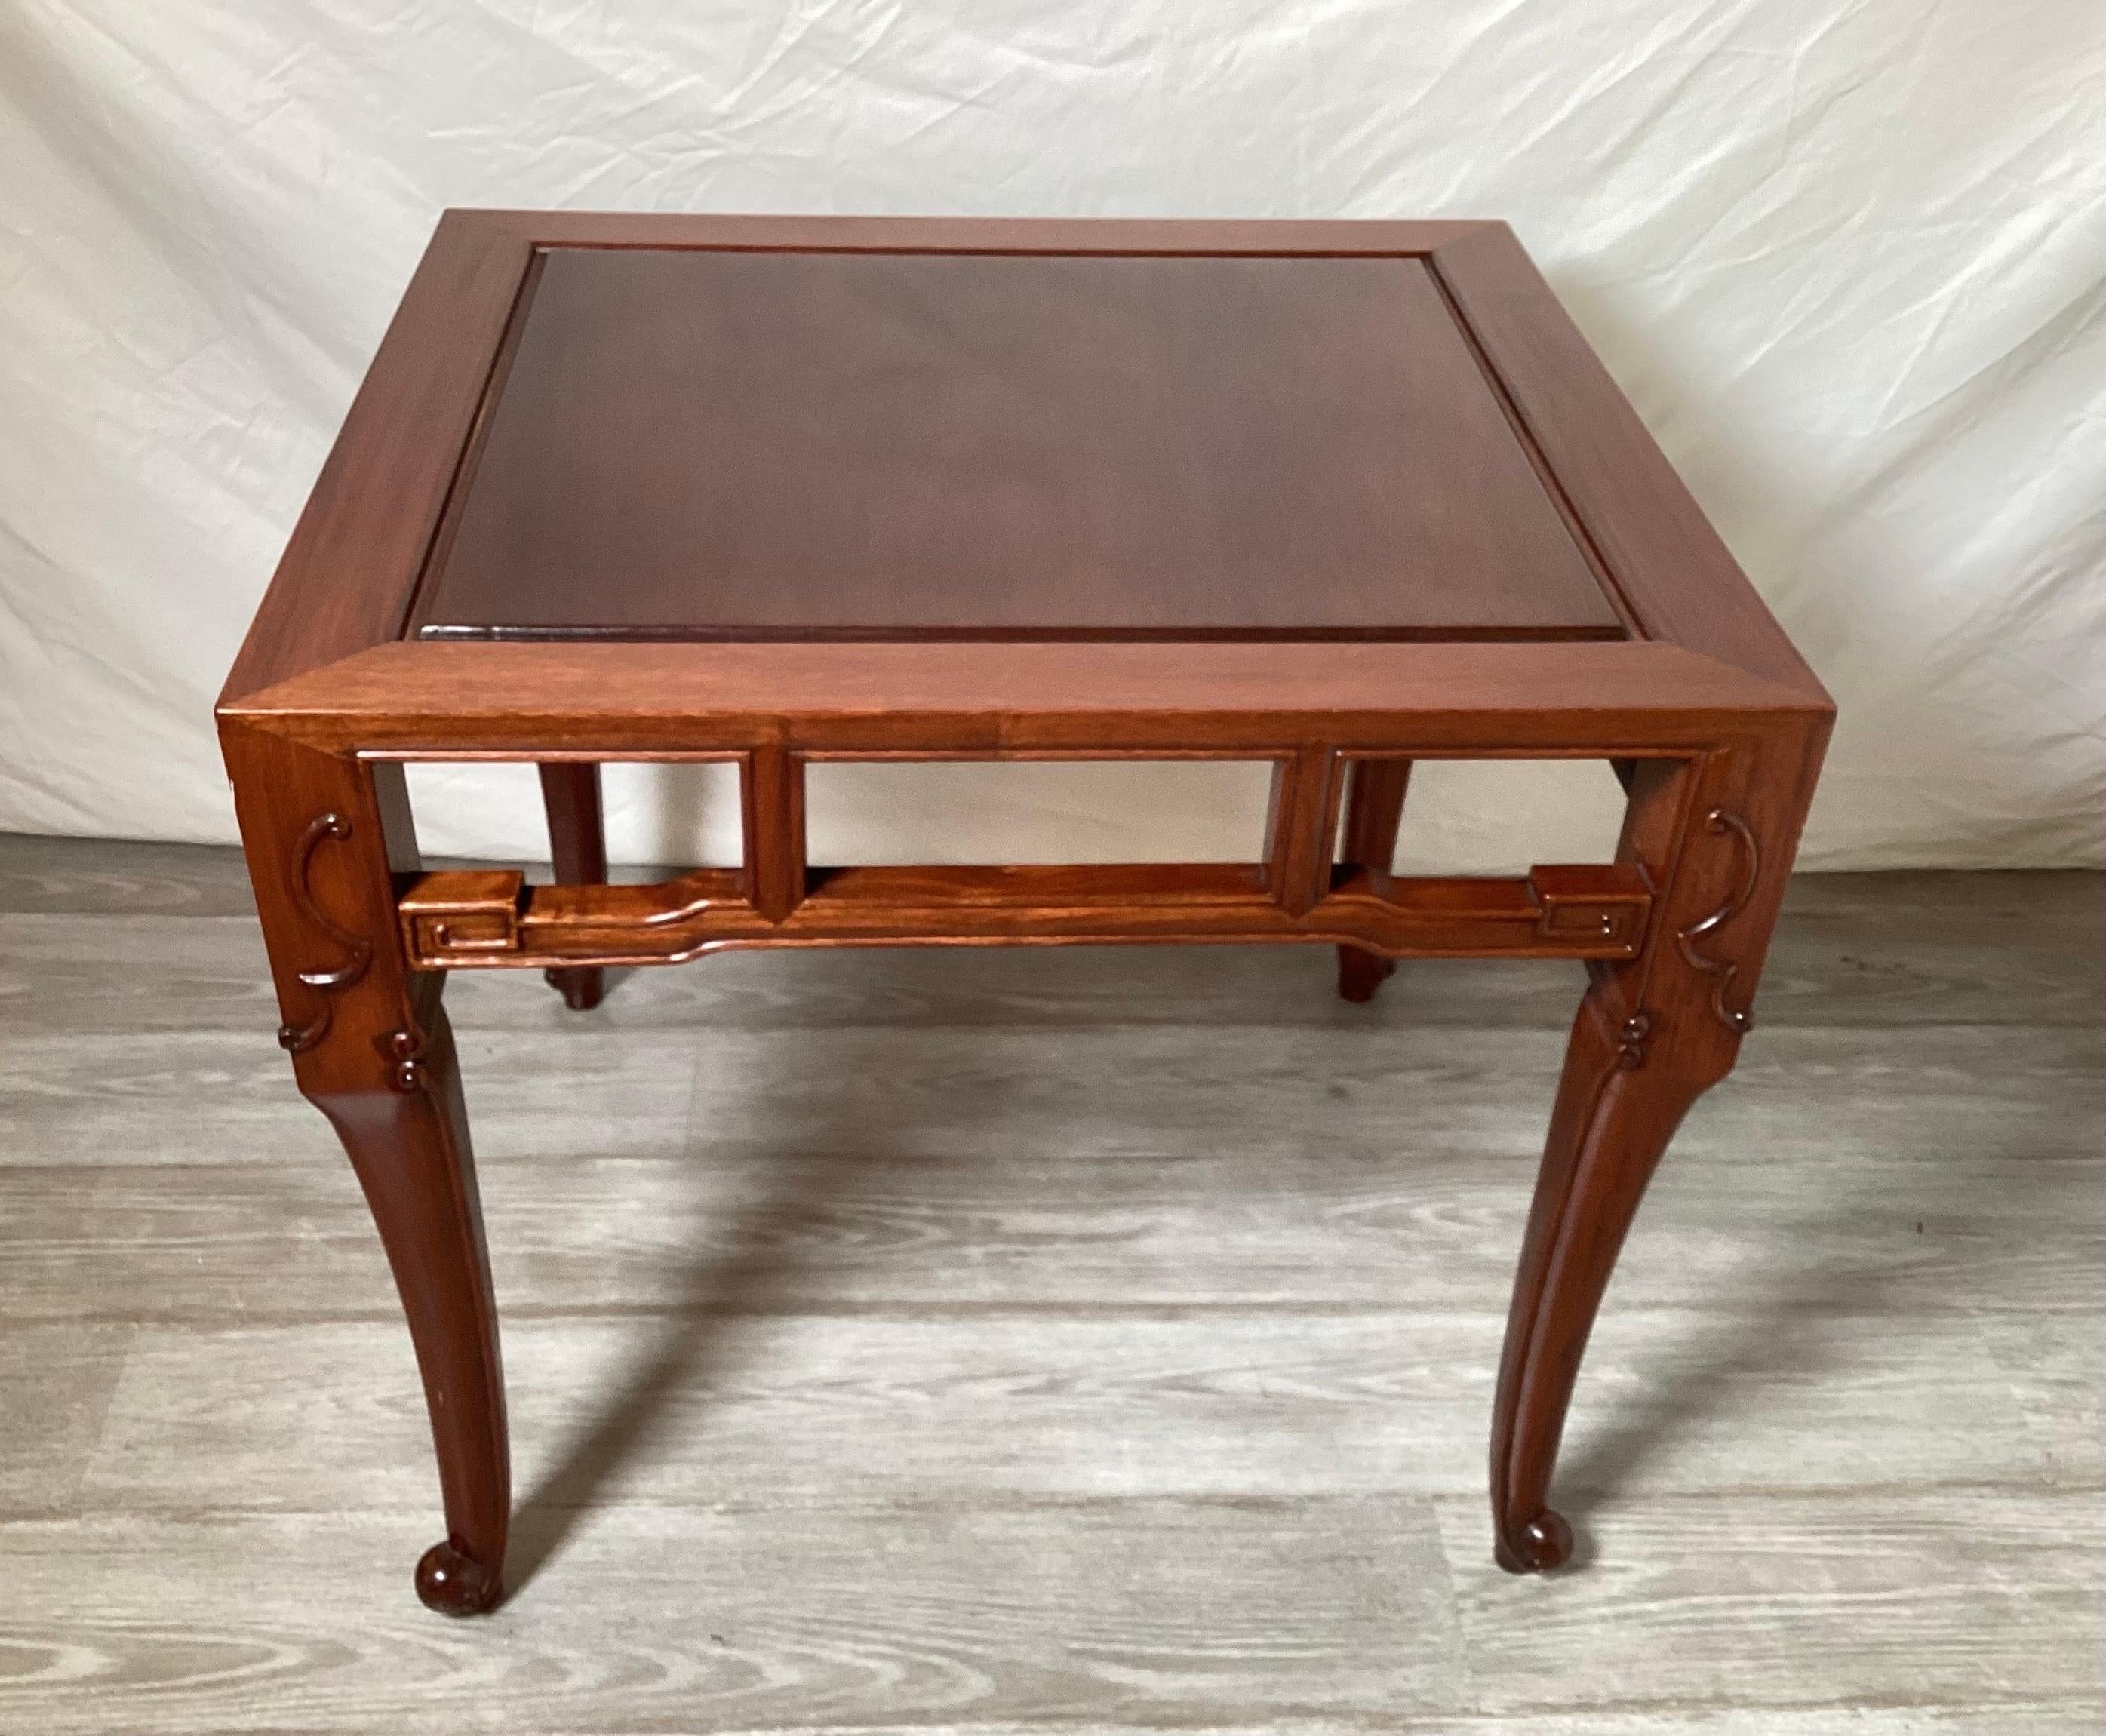 Elegant and simple hand carved Chinese hardwood table with beautifully detailed apron. The table is 24 deep, 25 wide, and 27 high. The top is intentionally a bit darker than the legs which also have a delicate carved detail at the top.